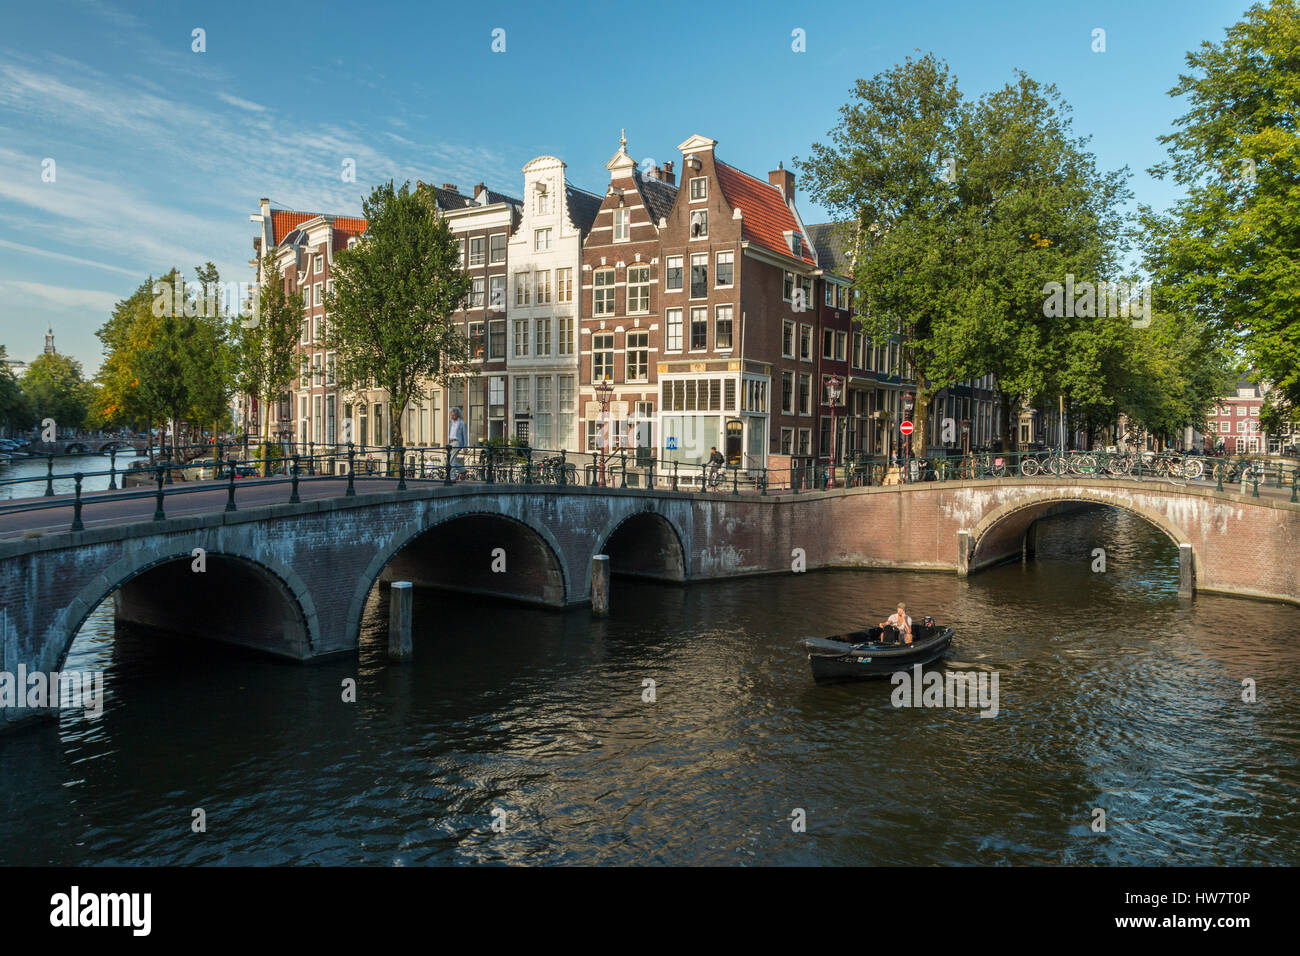 AMSTERDAM, NETHERLANDS- SEPTEMBER 27, 2016: Bridges, bikers and boaters at the intersection of the Keizersgracht and Leidsegracht Canals. Stock Photo